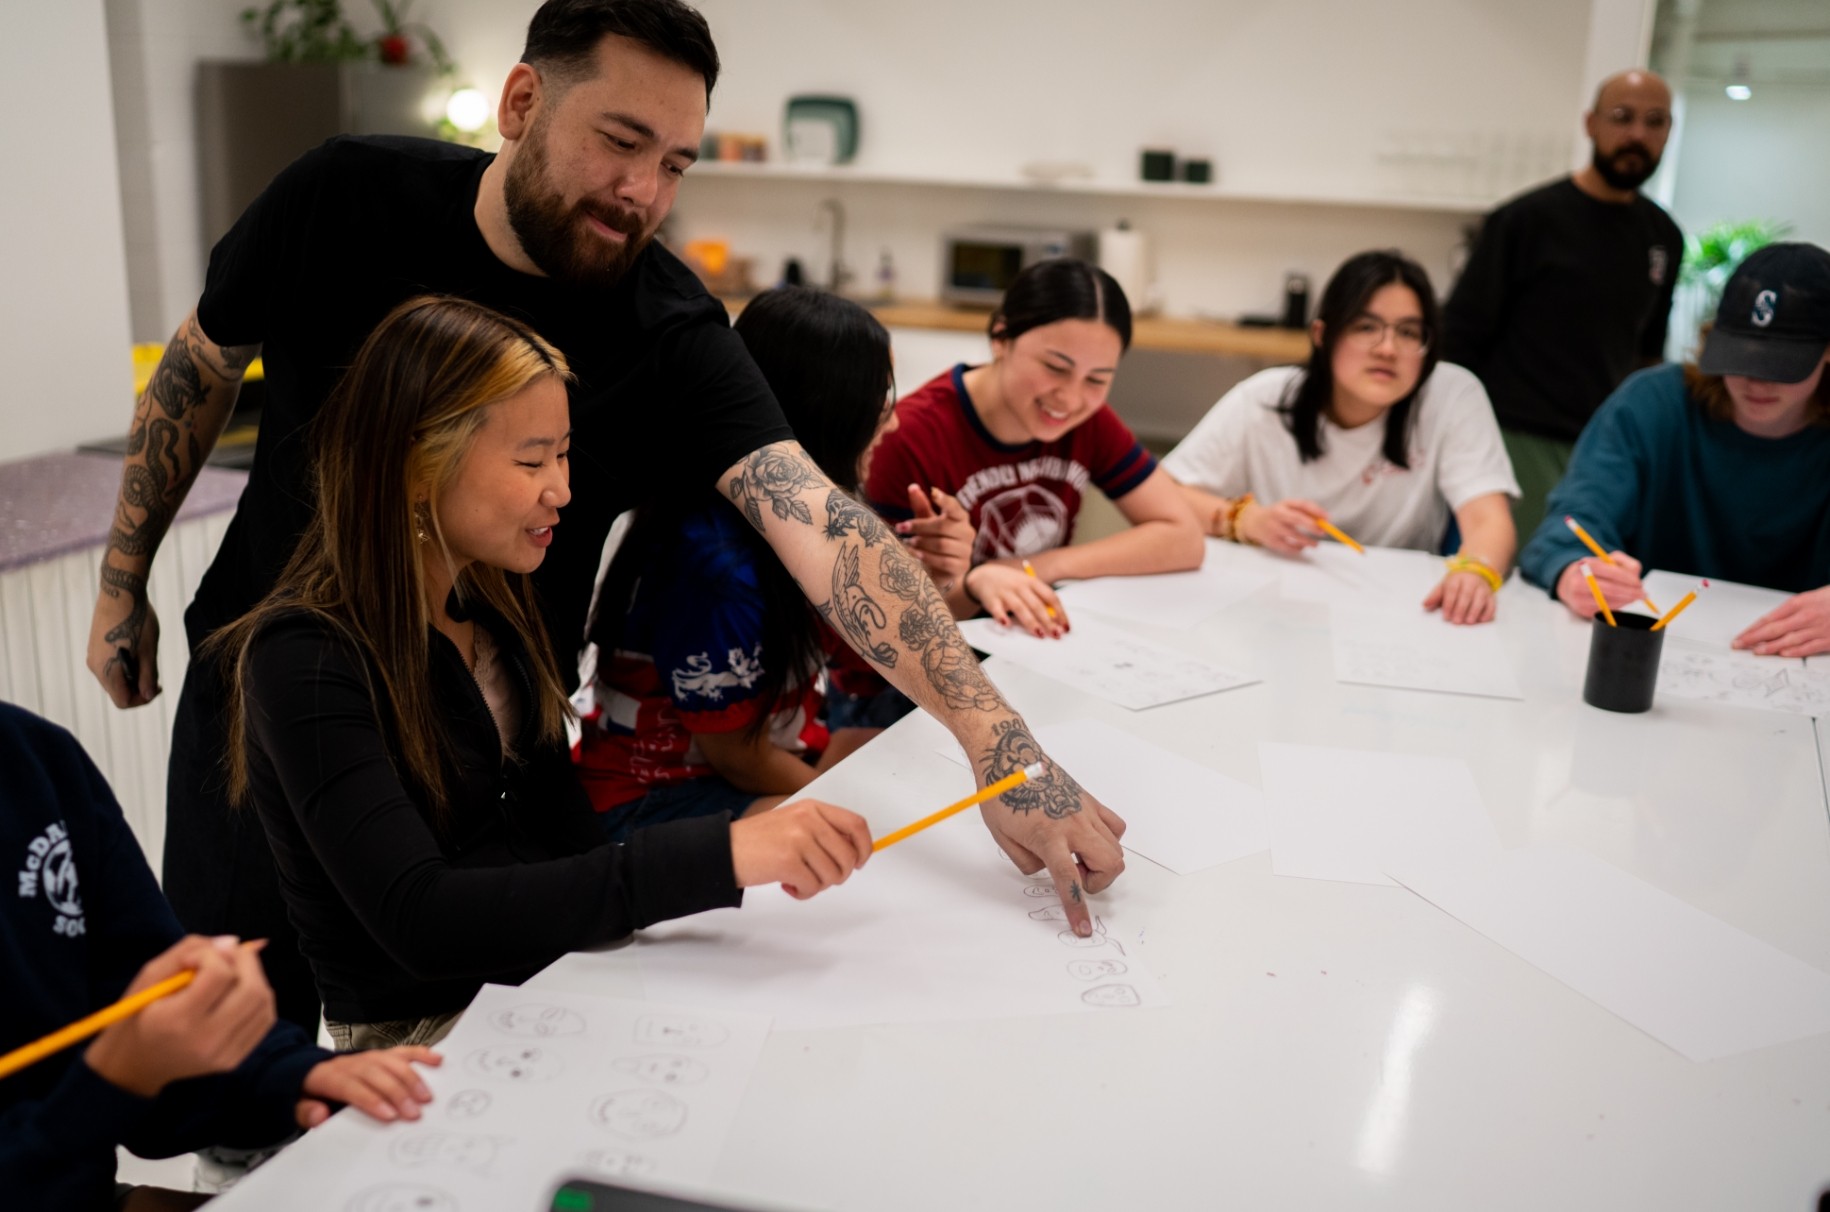 Adults gathered around a table in a workshop, drawing on paper with pencils and markers, interacting and smiling.